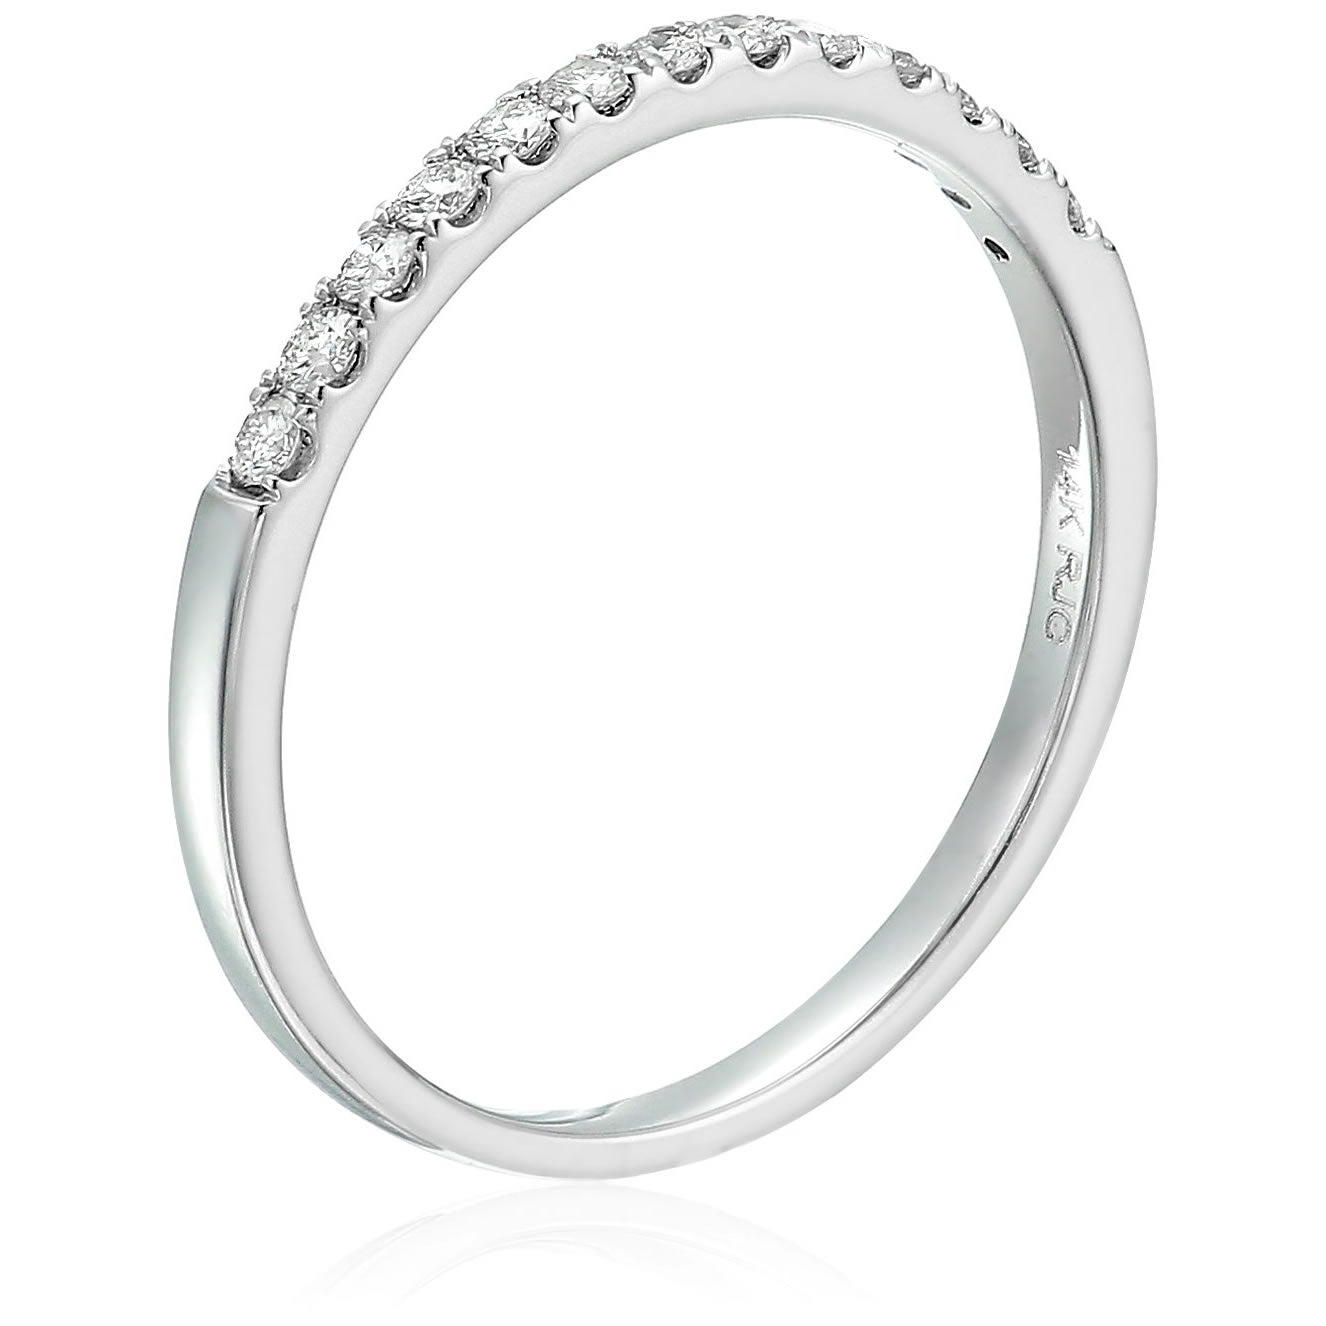 1/5 cttw Pave Diamond Wedding Band for Women in 14K White Gold Prong Set Ring, Size 4-10